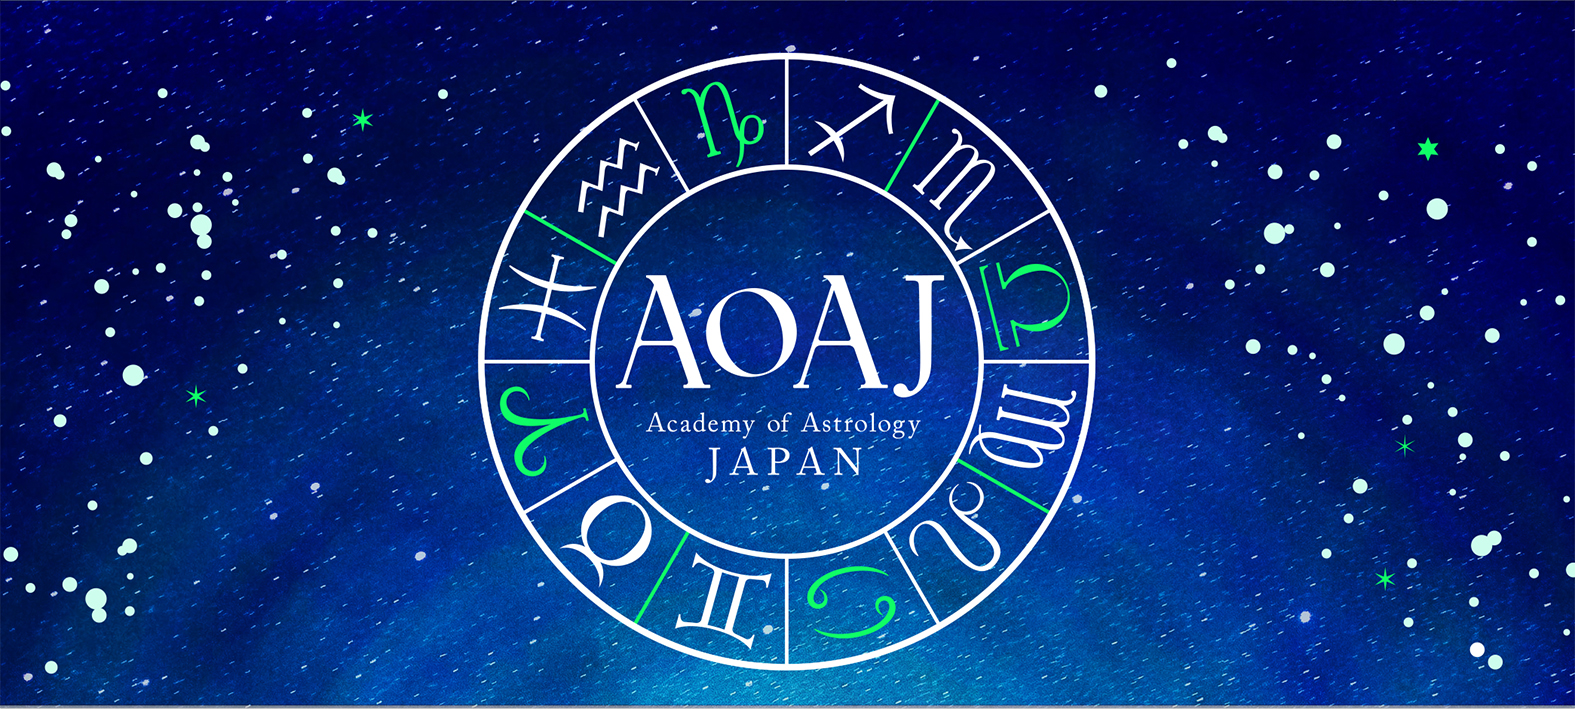 about AoAJ | Academy of Astrology Japan